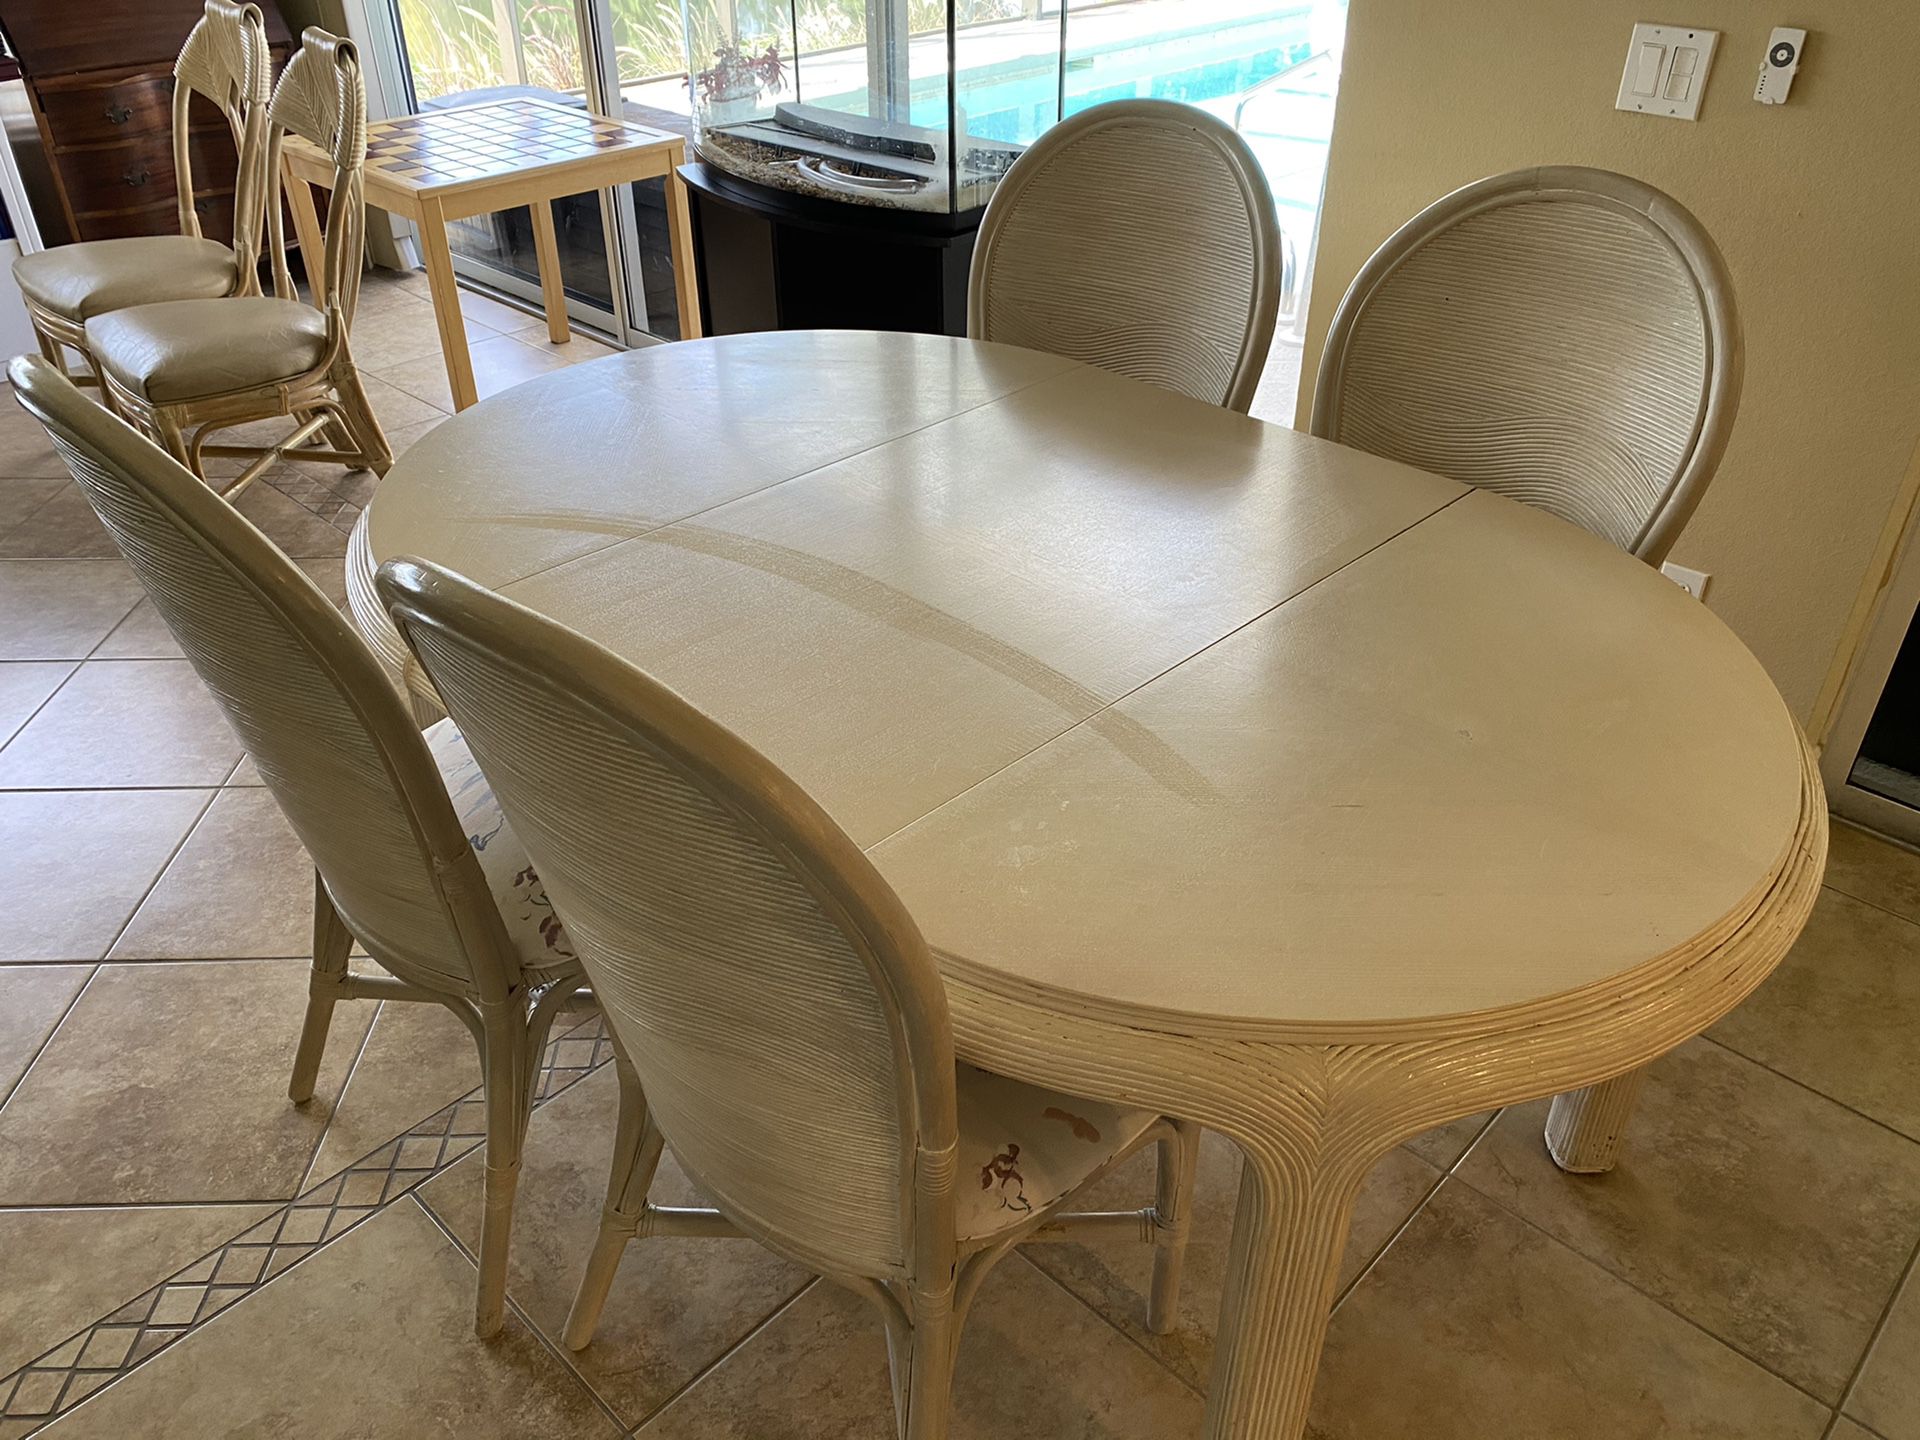 4 Chair Dining Table/ Breakfast Nook